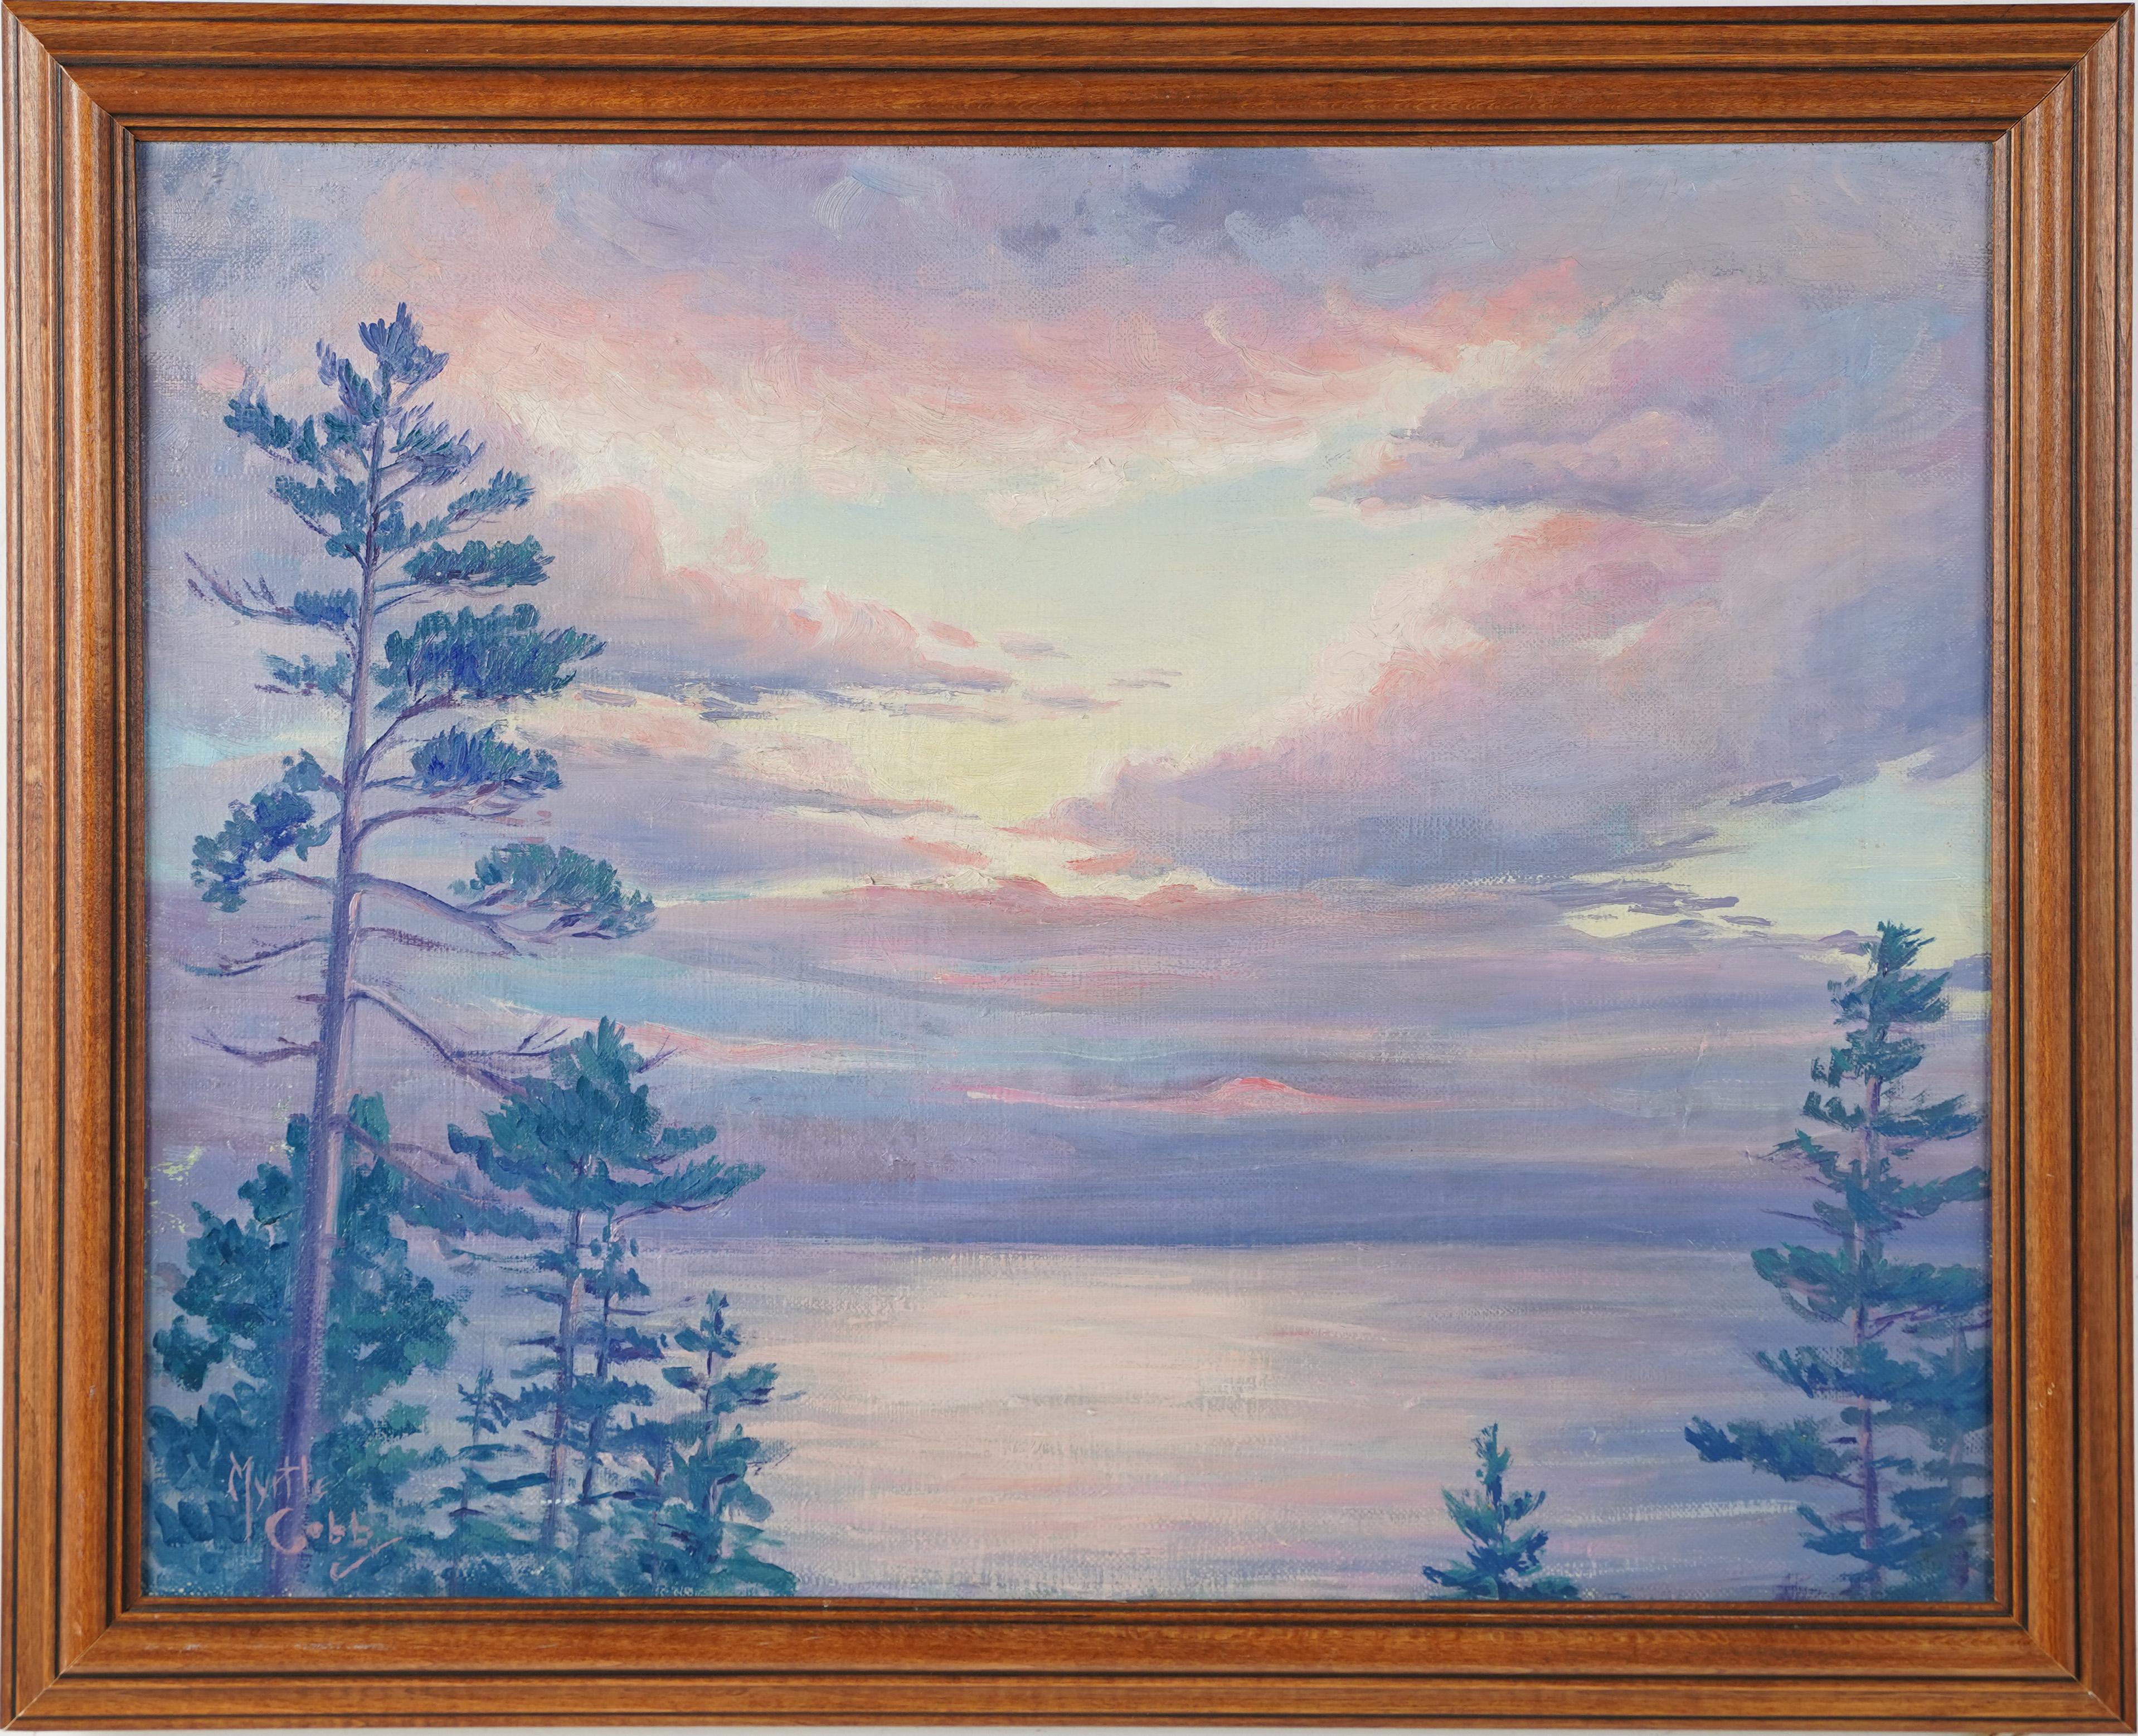  Antique American School Signed Panoramic Sunset Landscape Framed Oil Painting - Gray Landscape Painting by Unknown